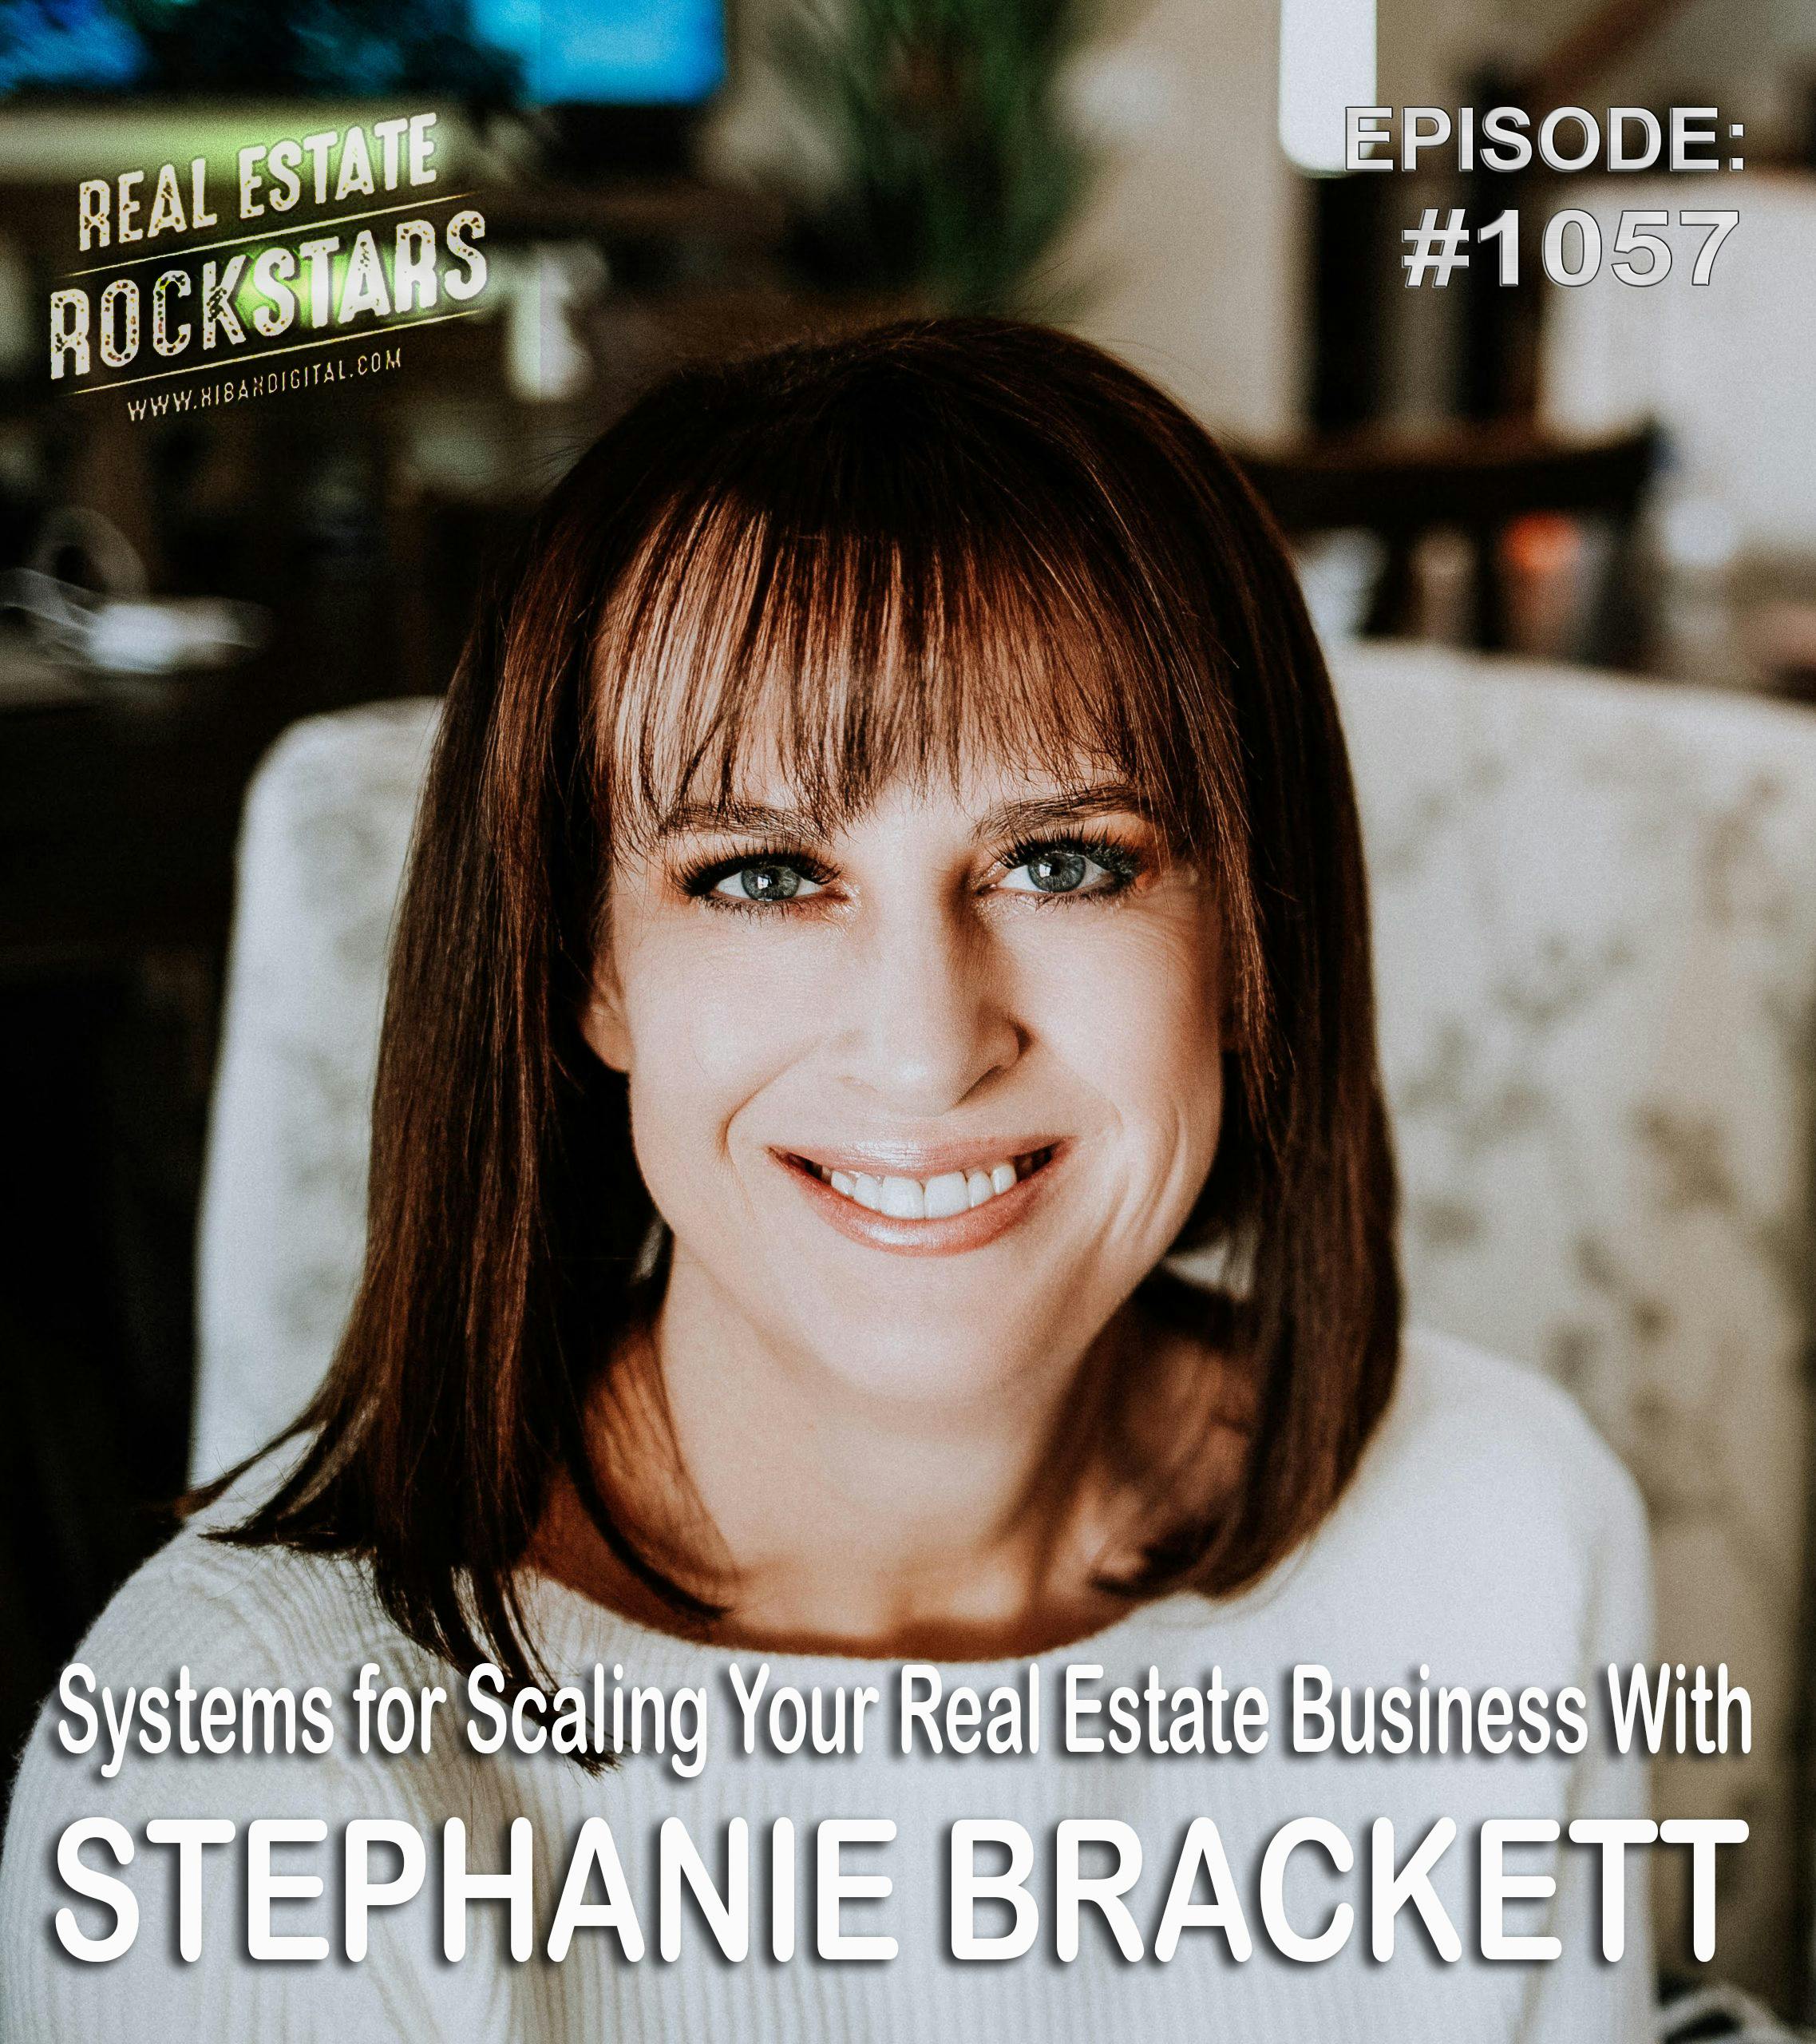 1057: Systems for Scaling Your Real Estate Business With Stephanie Brackett